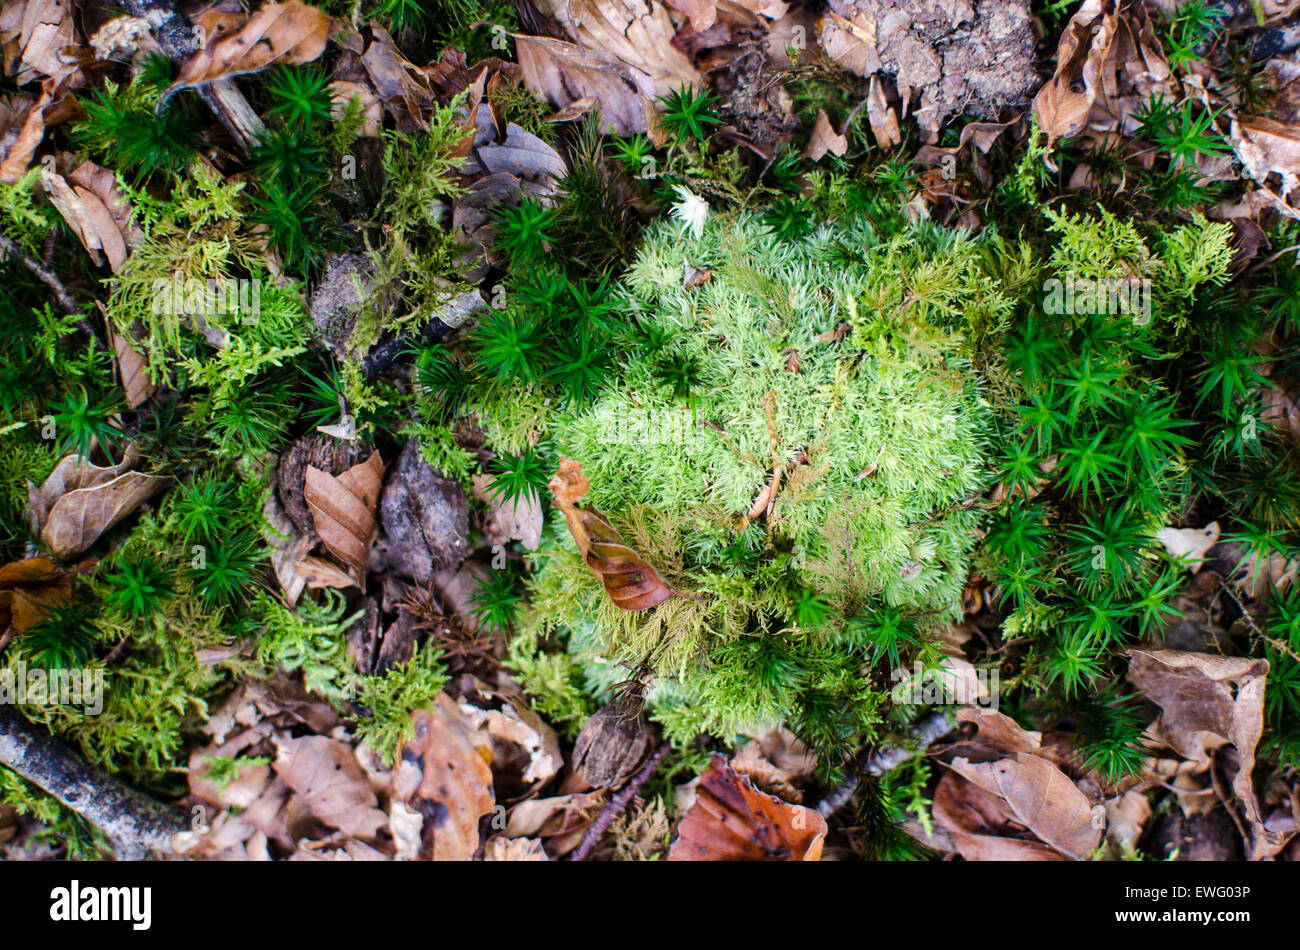 Plants and Grass Growing Between Leaves Stock Photo